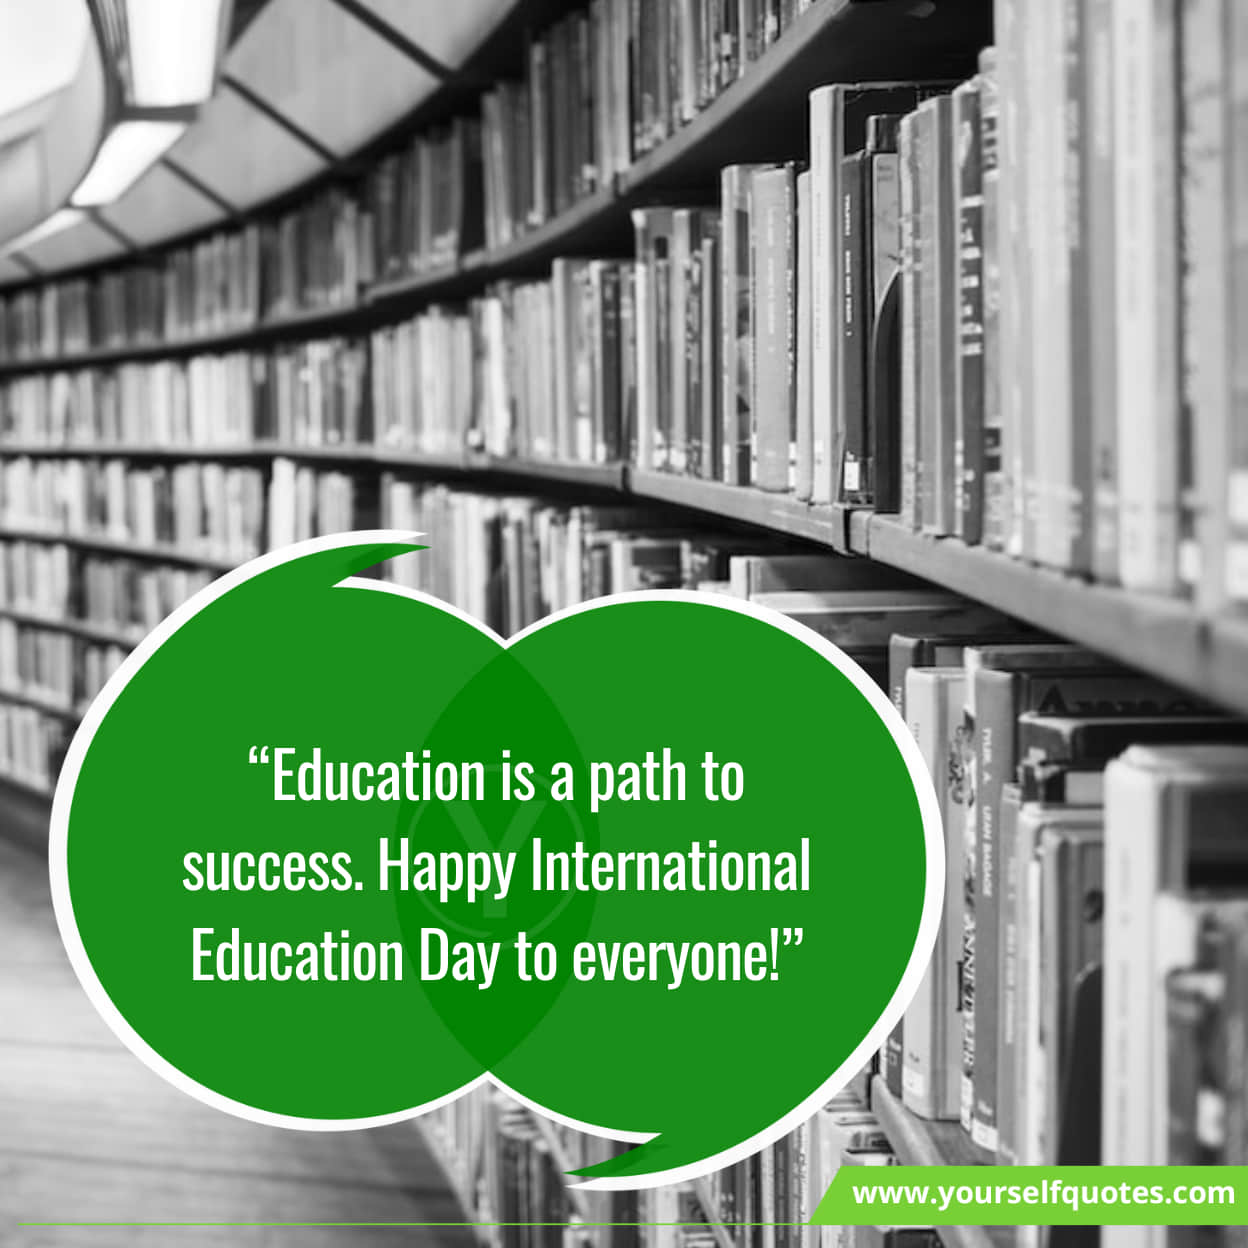 Best Wishes On Education Day